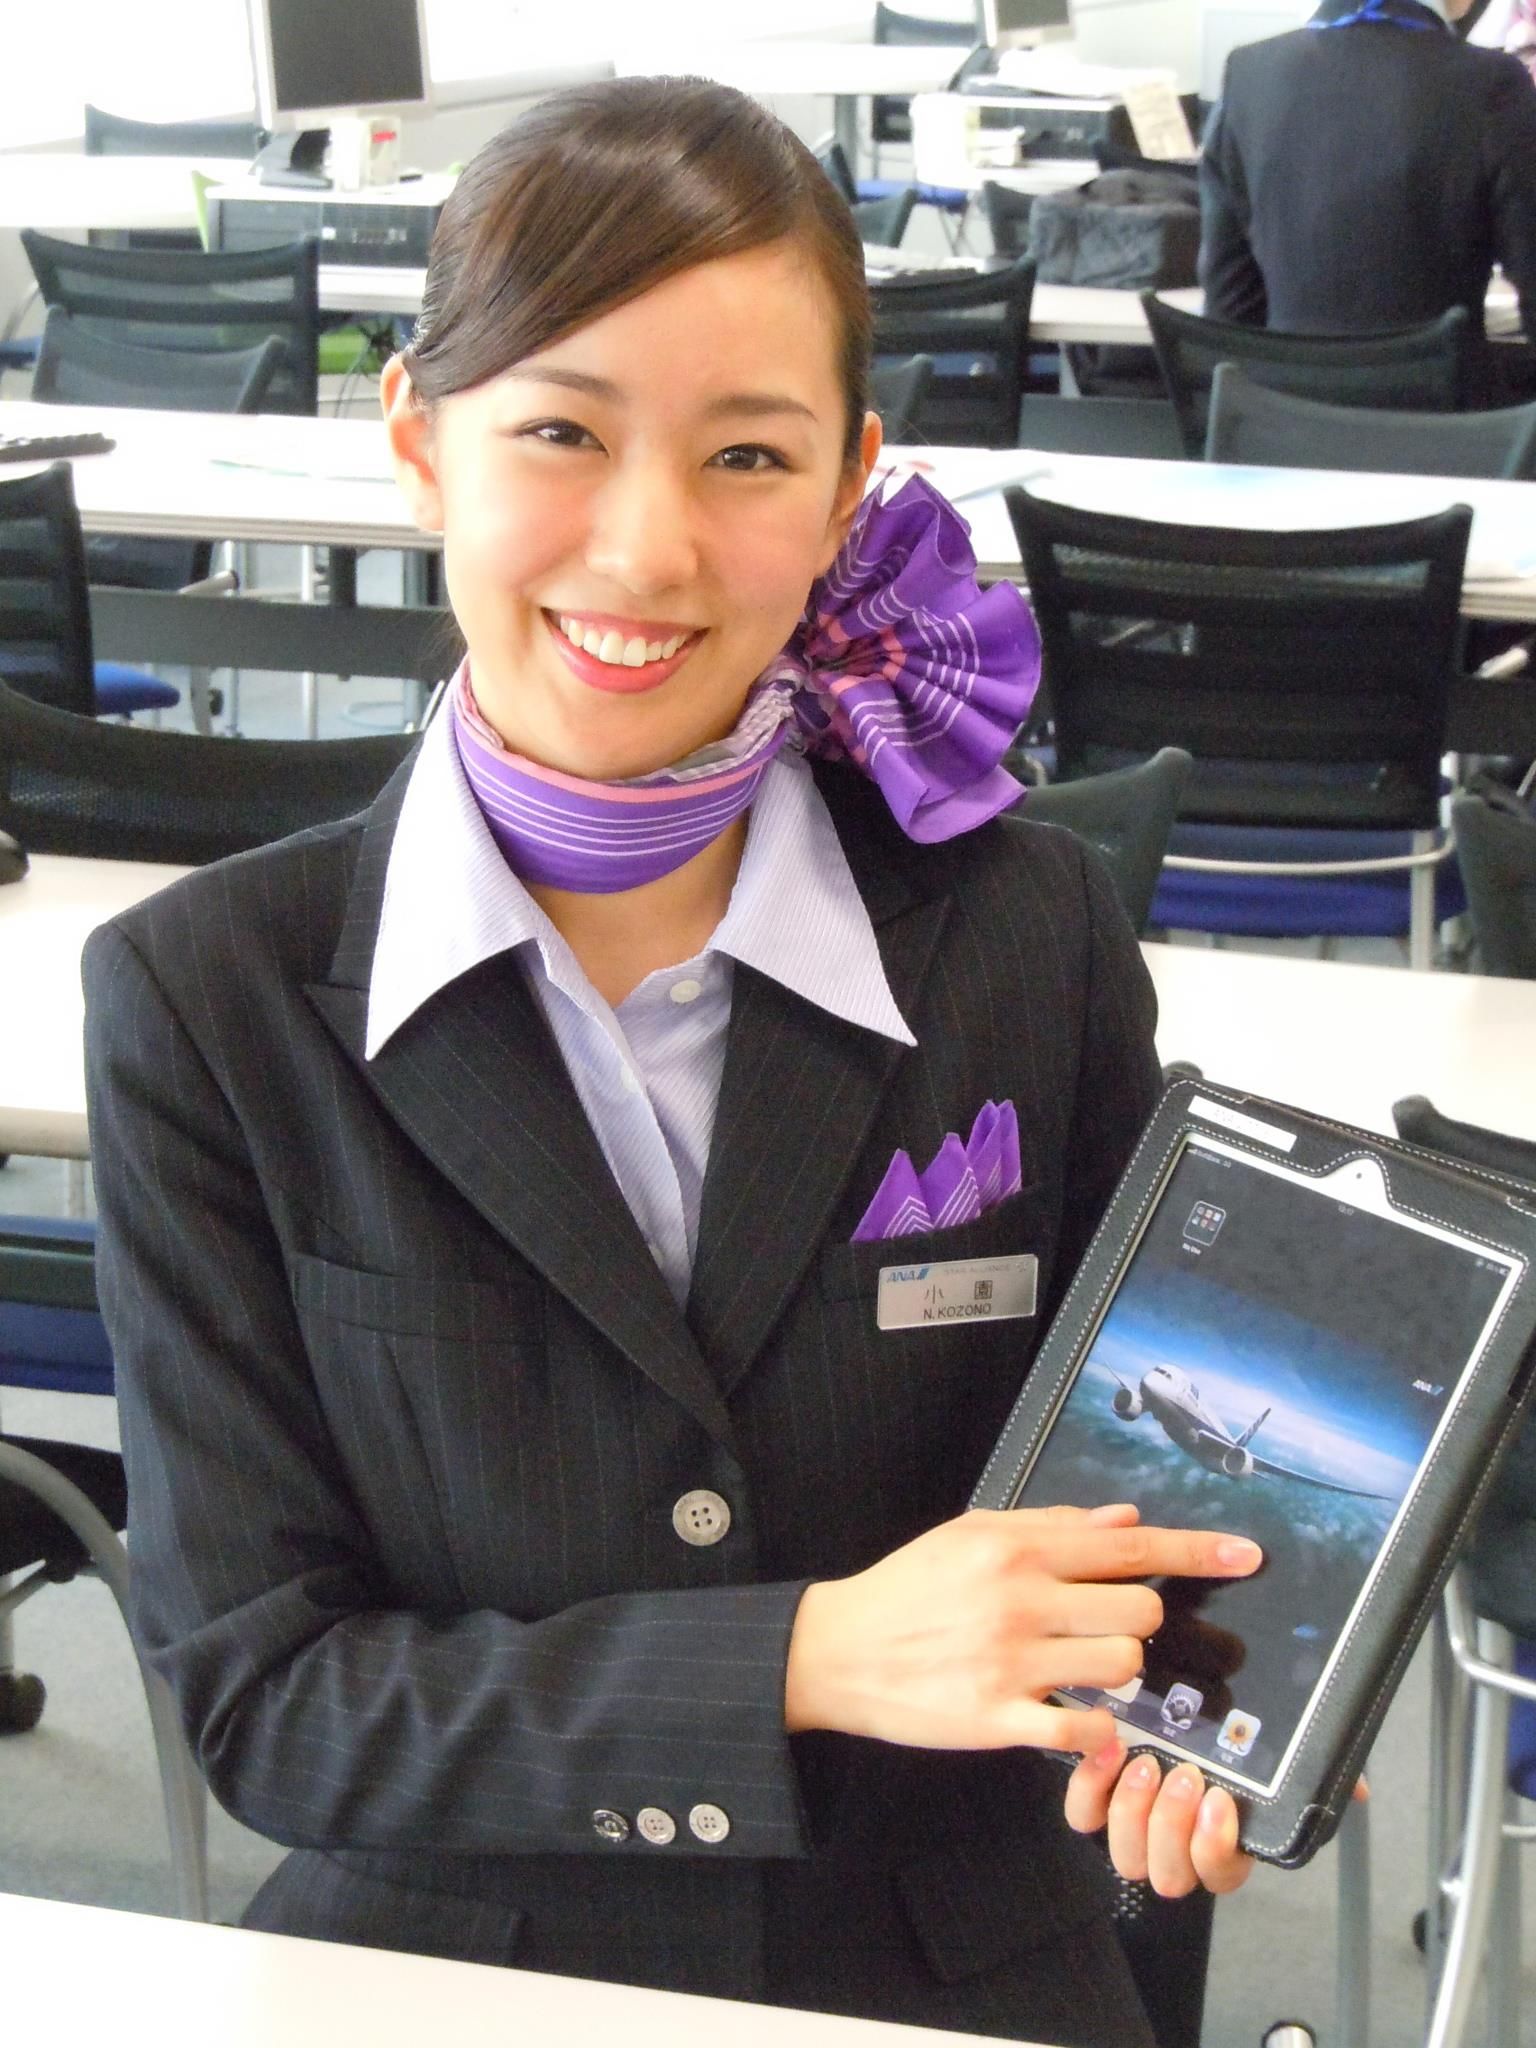 An All Nippon Airways flight attendant using a tablet.